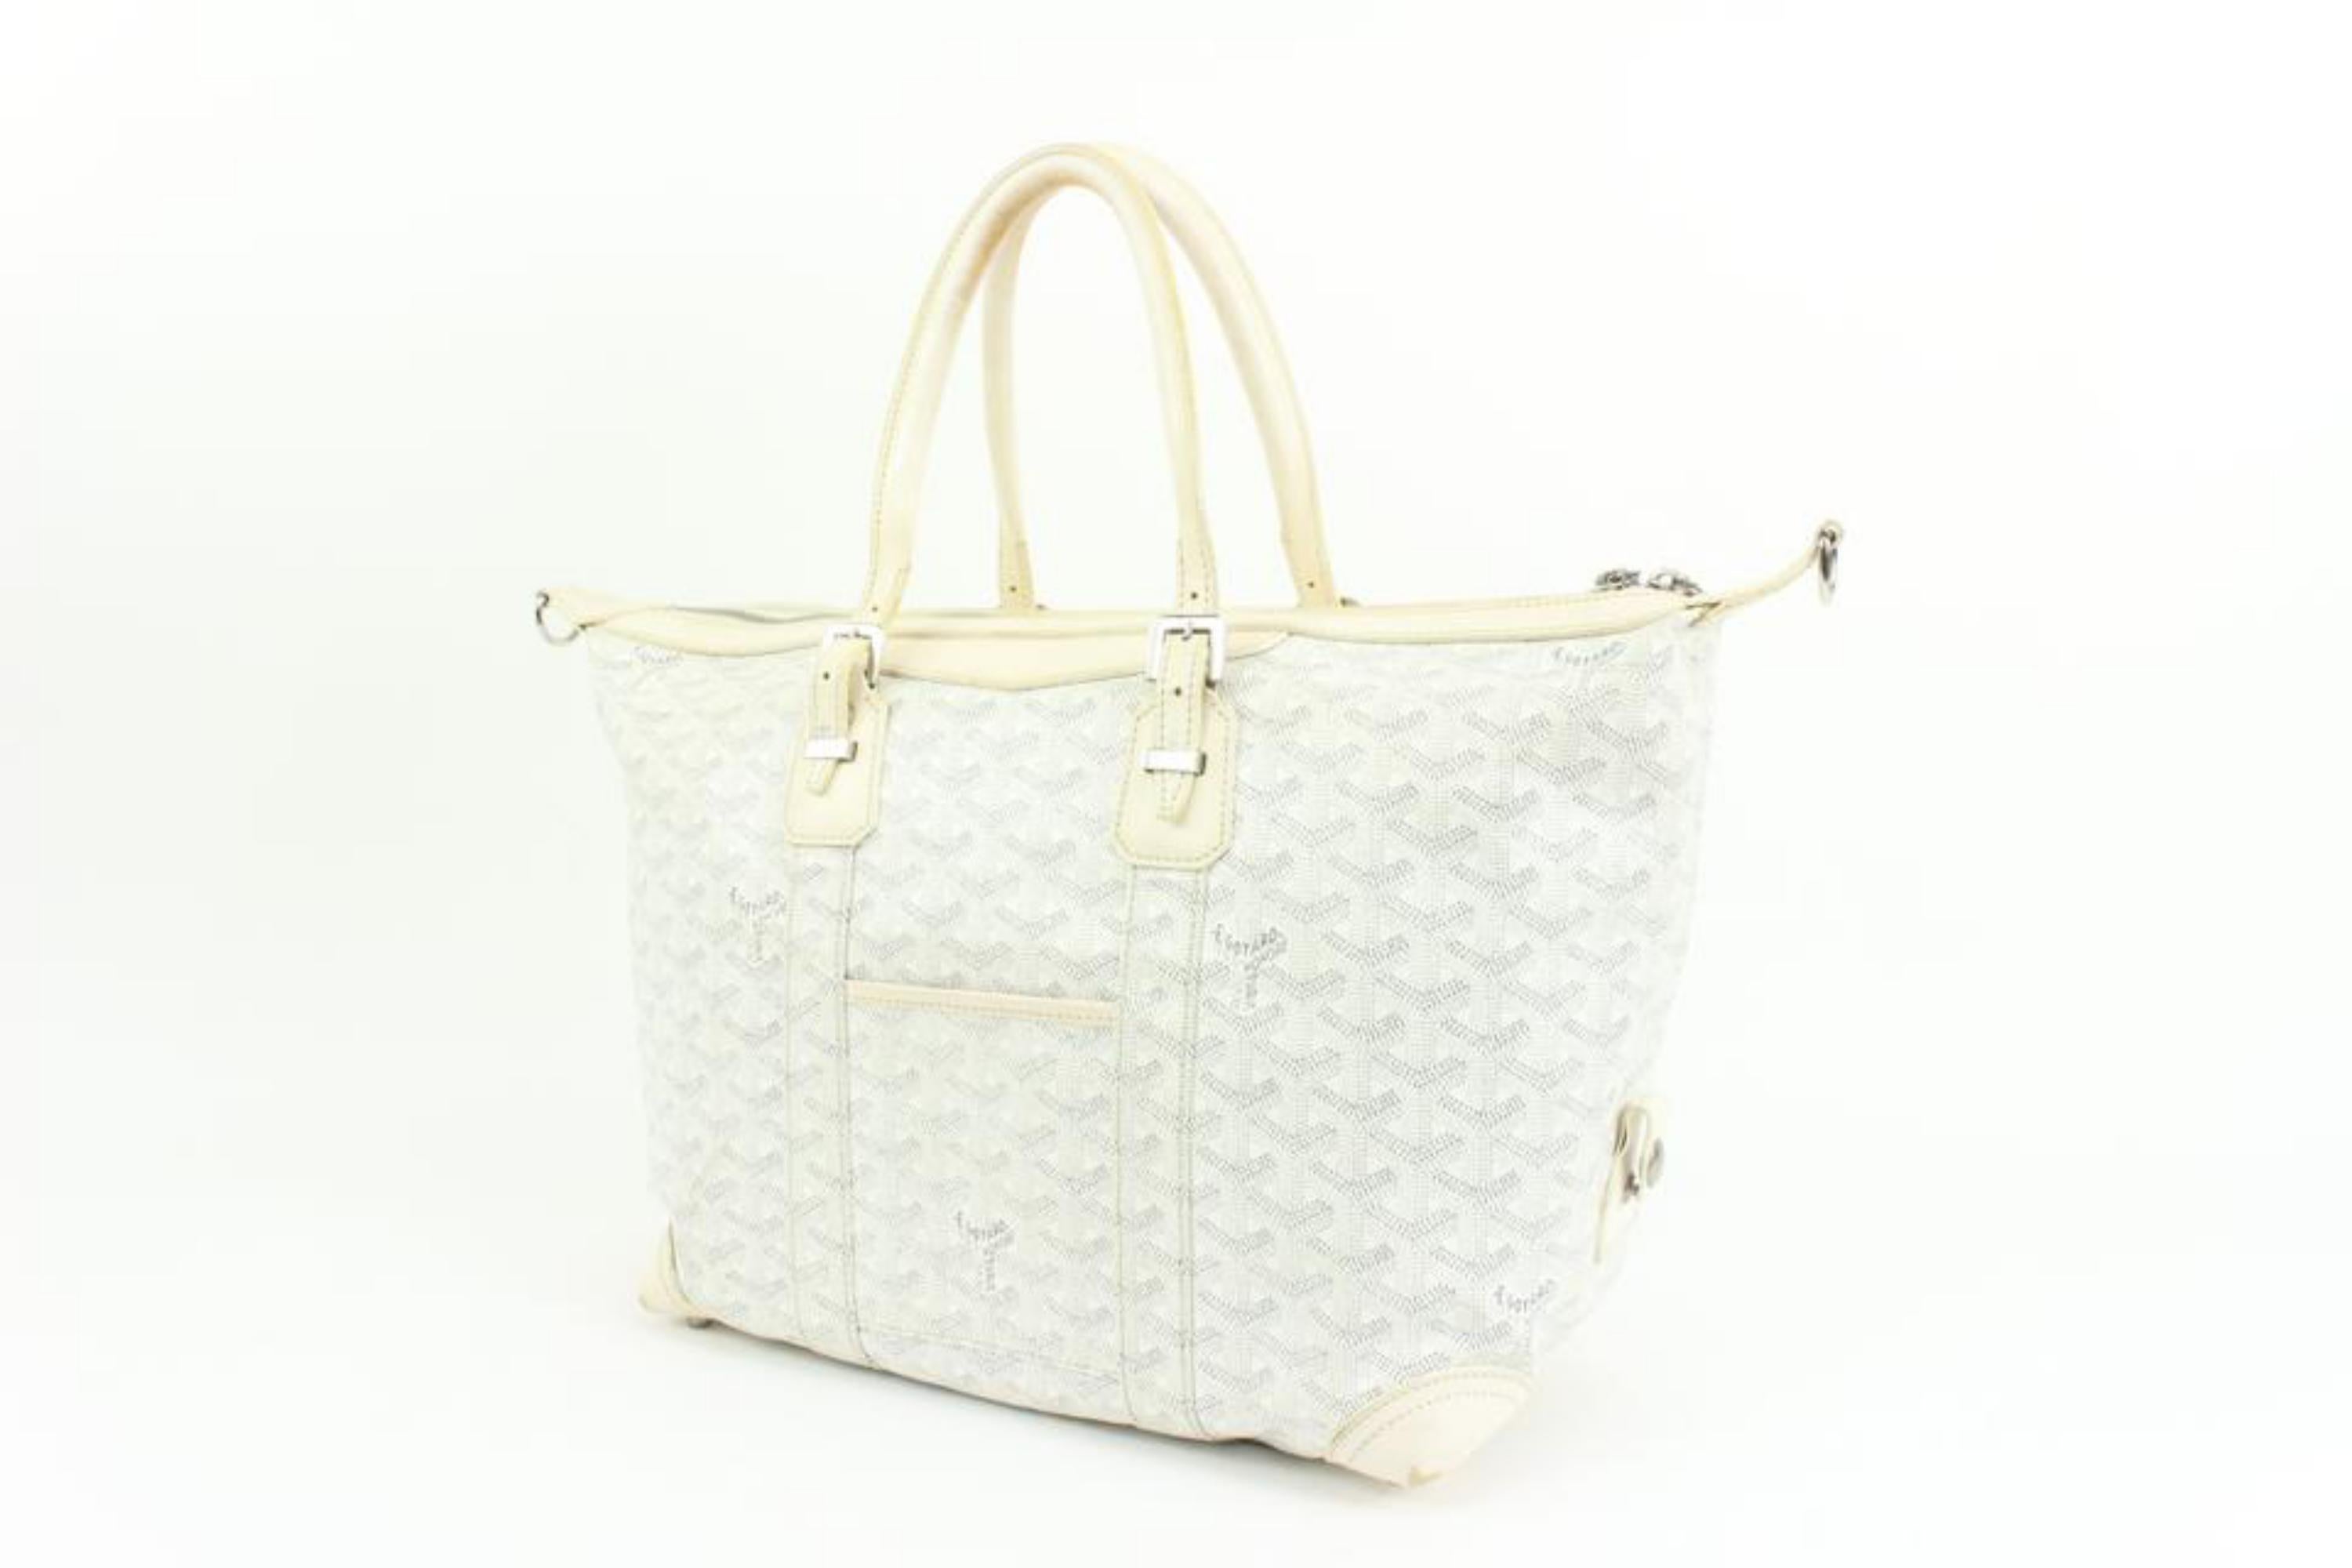 Goyard White Chevron Boeing 30 Boston Bag 81gy328s
Date Code/Serial Number: BAE0200907
Made In: France
Measurements: Length:  16